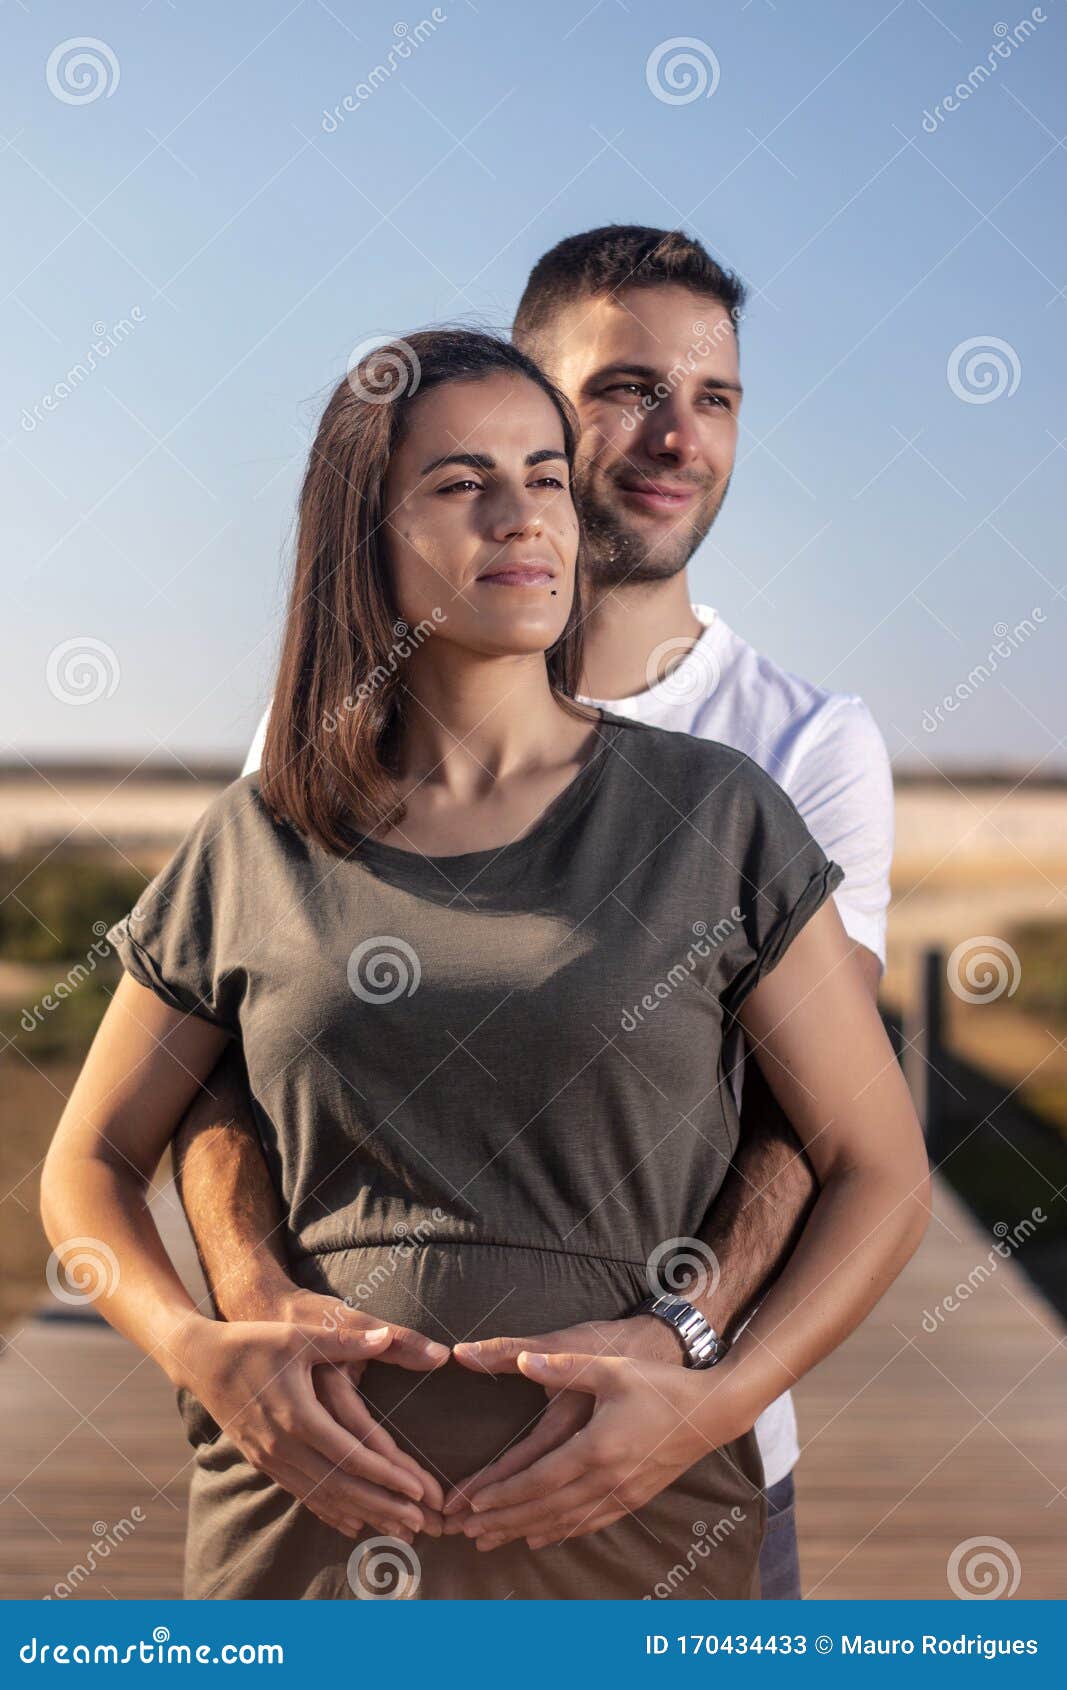 Ideal Couple Poses In A Wedding - The Planners